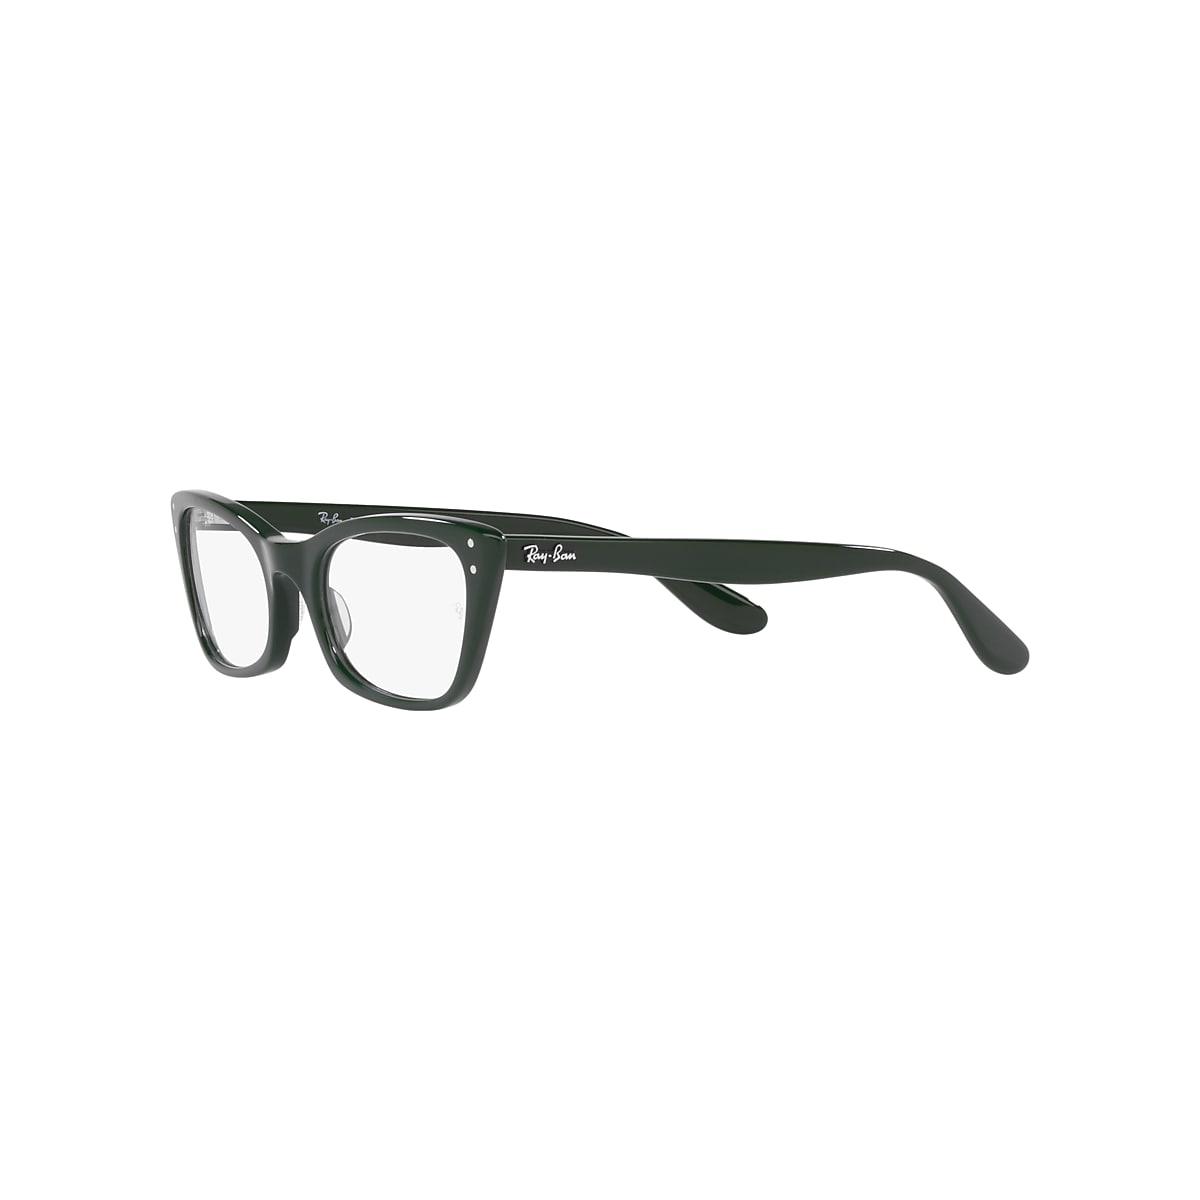 At vise overdrive system LADY BURBANK OPTICS Eyeglasses with Green Frame - RB5499 | Ray-Ban® EU